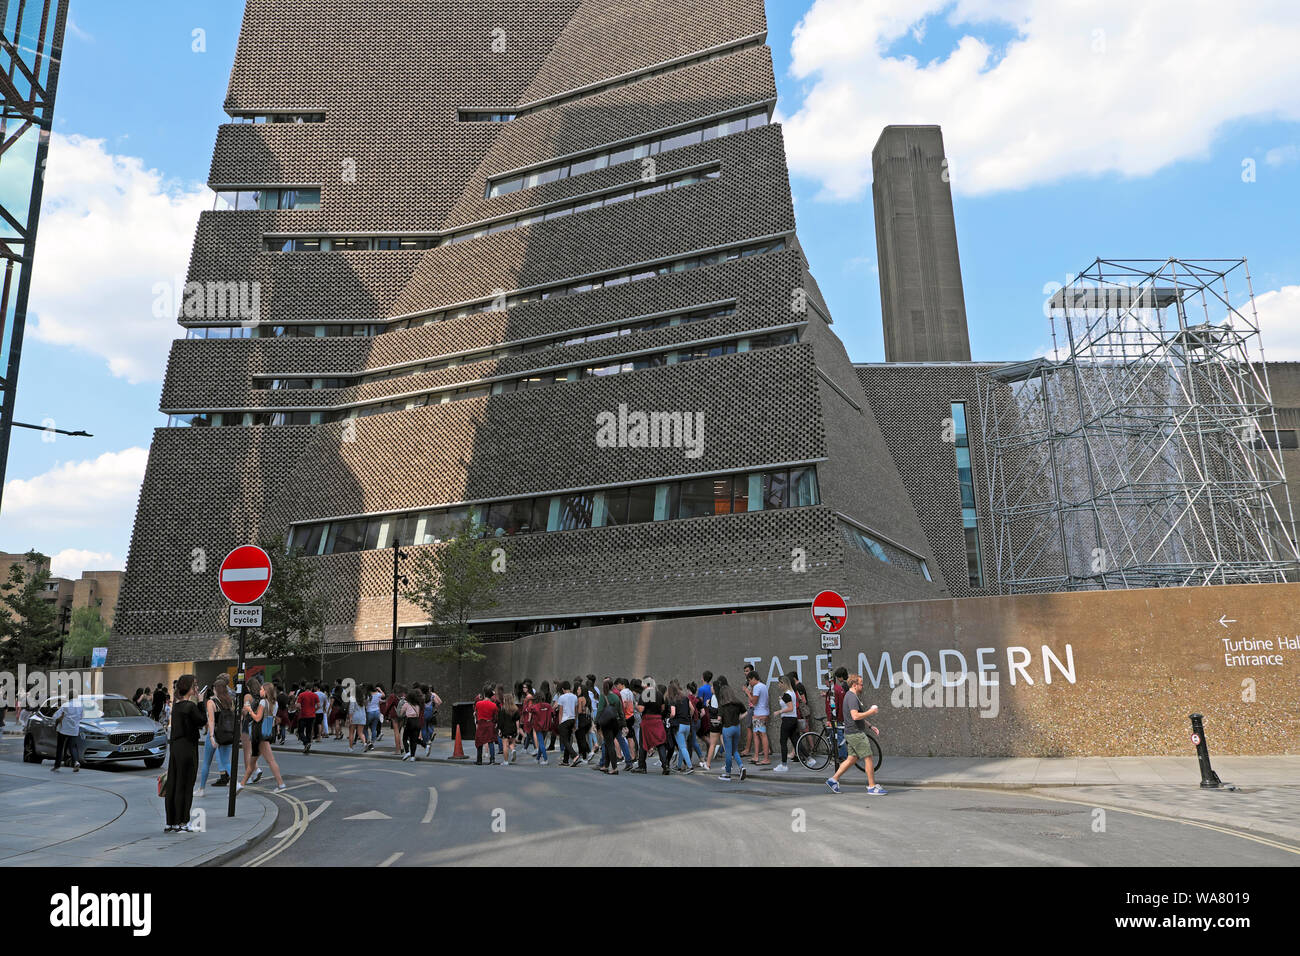 Queue of European visitors students walking in the street near the Tate Modern Art Gallery extension South London England UK  KATHY DEWITT Stock Photo